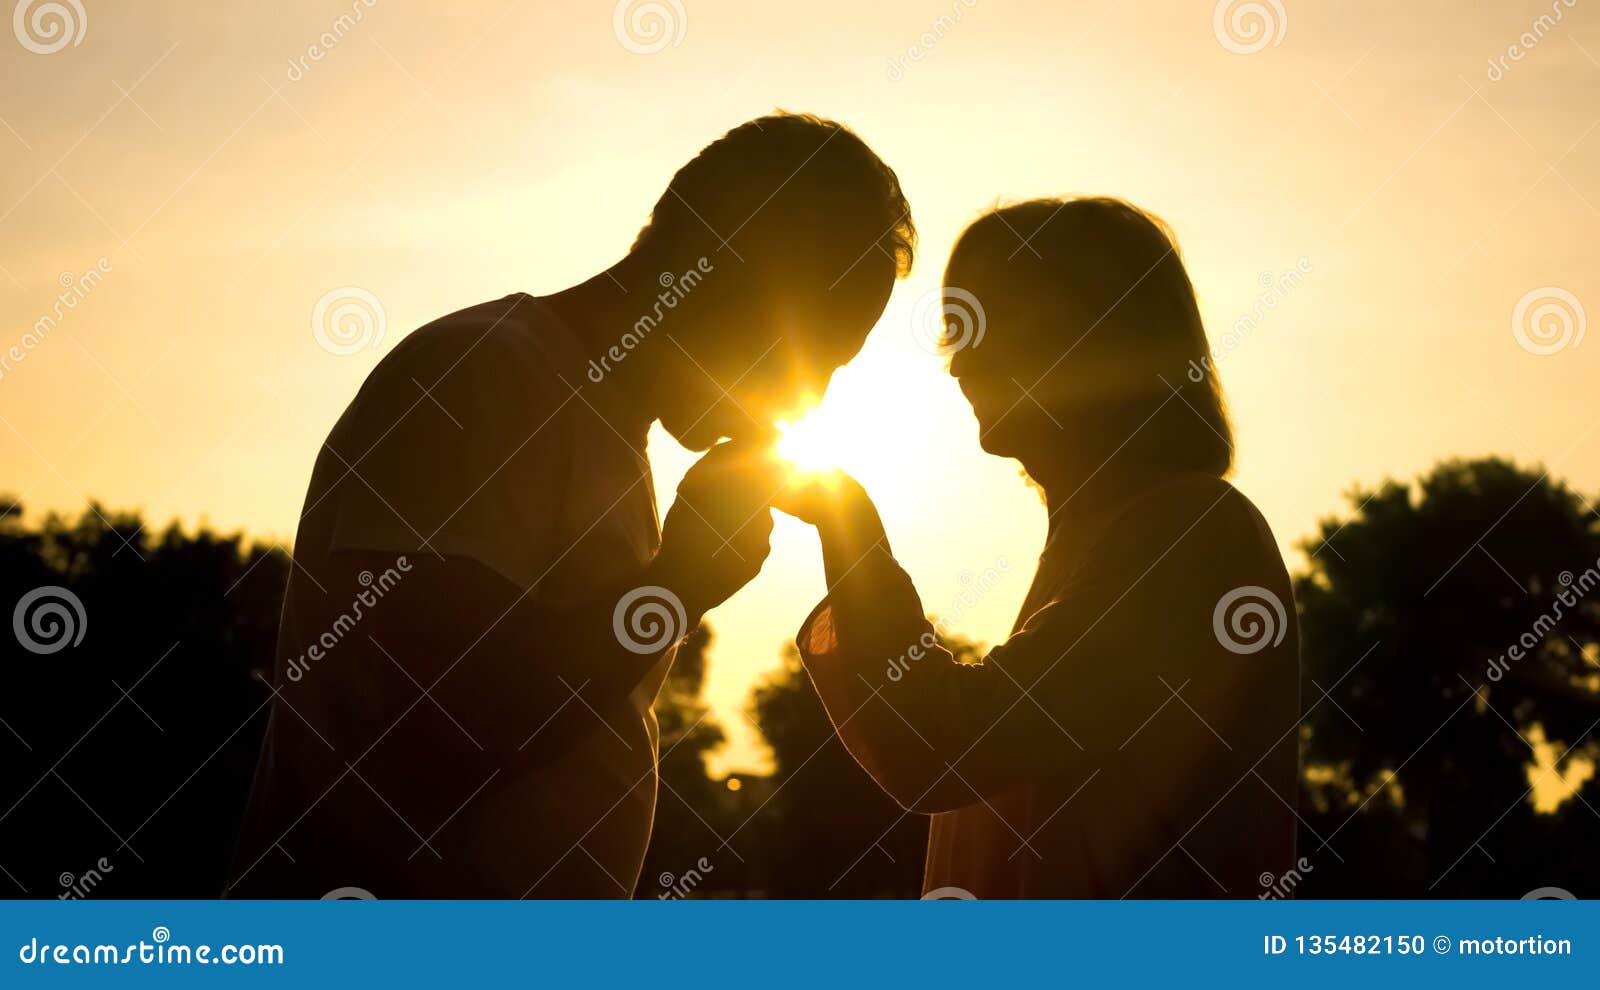 silhouette of gentleman kissing wife's hand, senior couple in love, romance